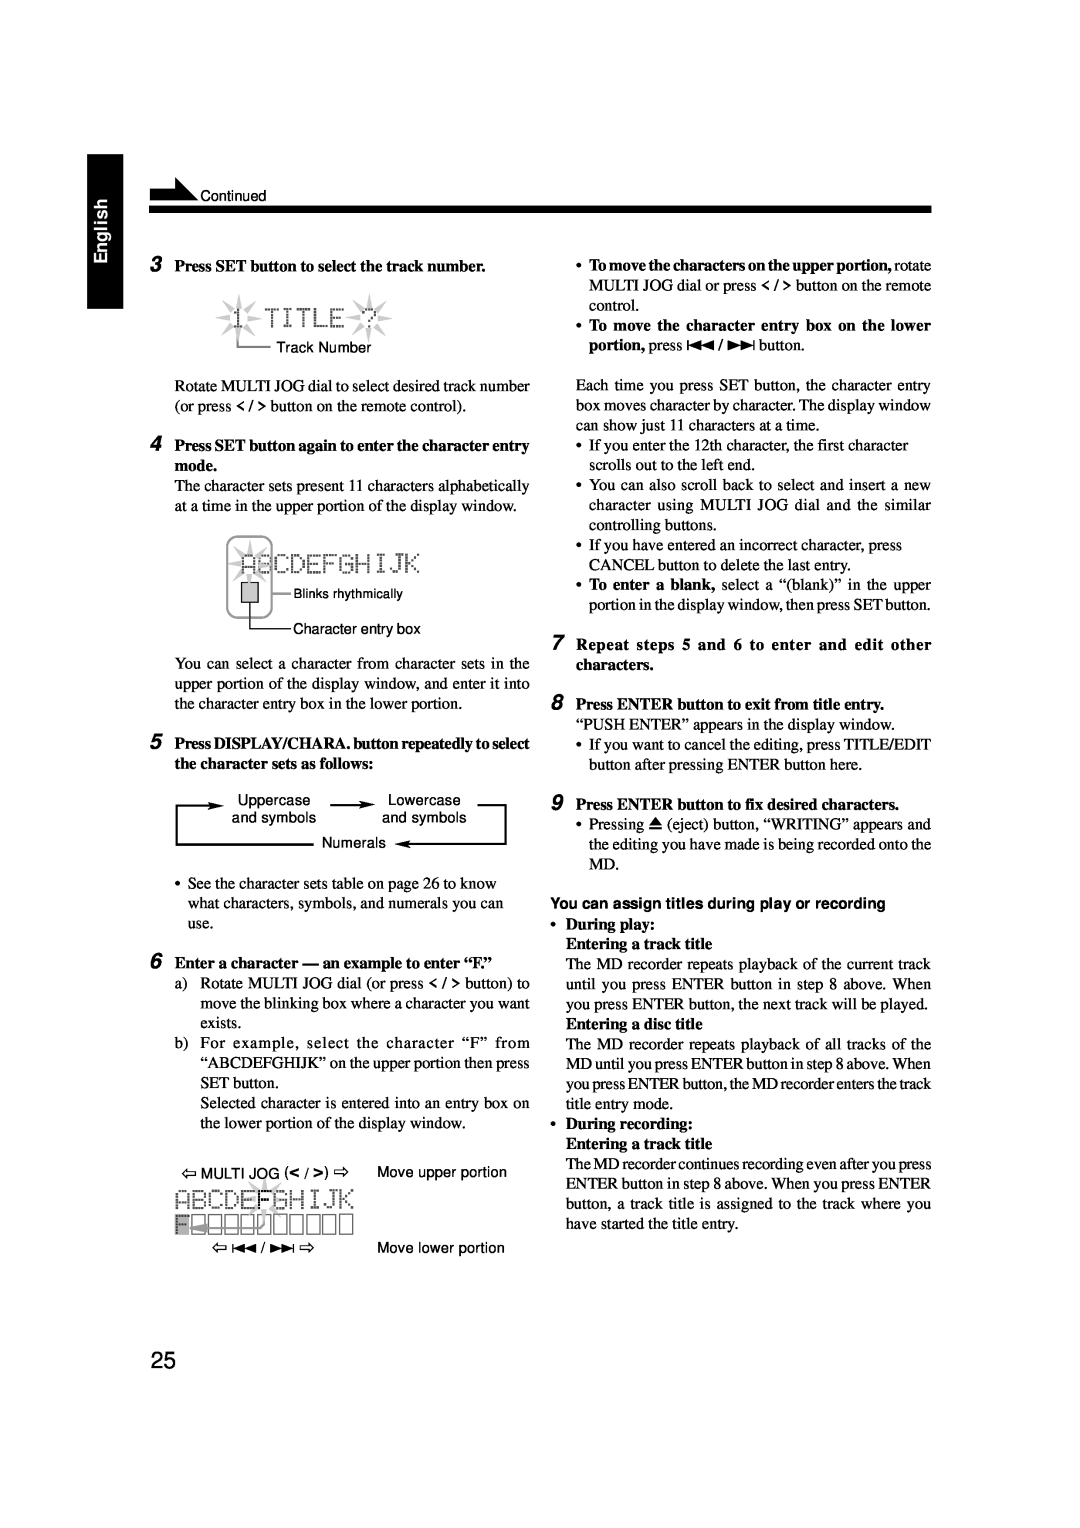 JVC LVT0378-001A, 0200JTMMDWJSCEN manual You can assign titles during play or recording, English 